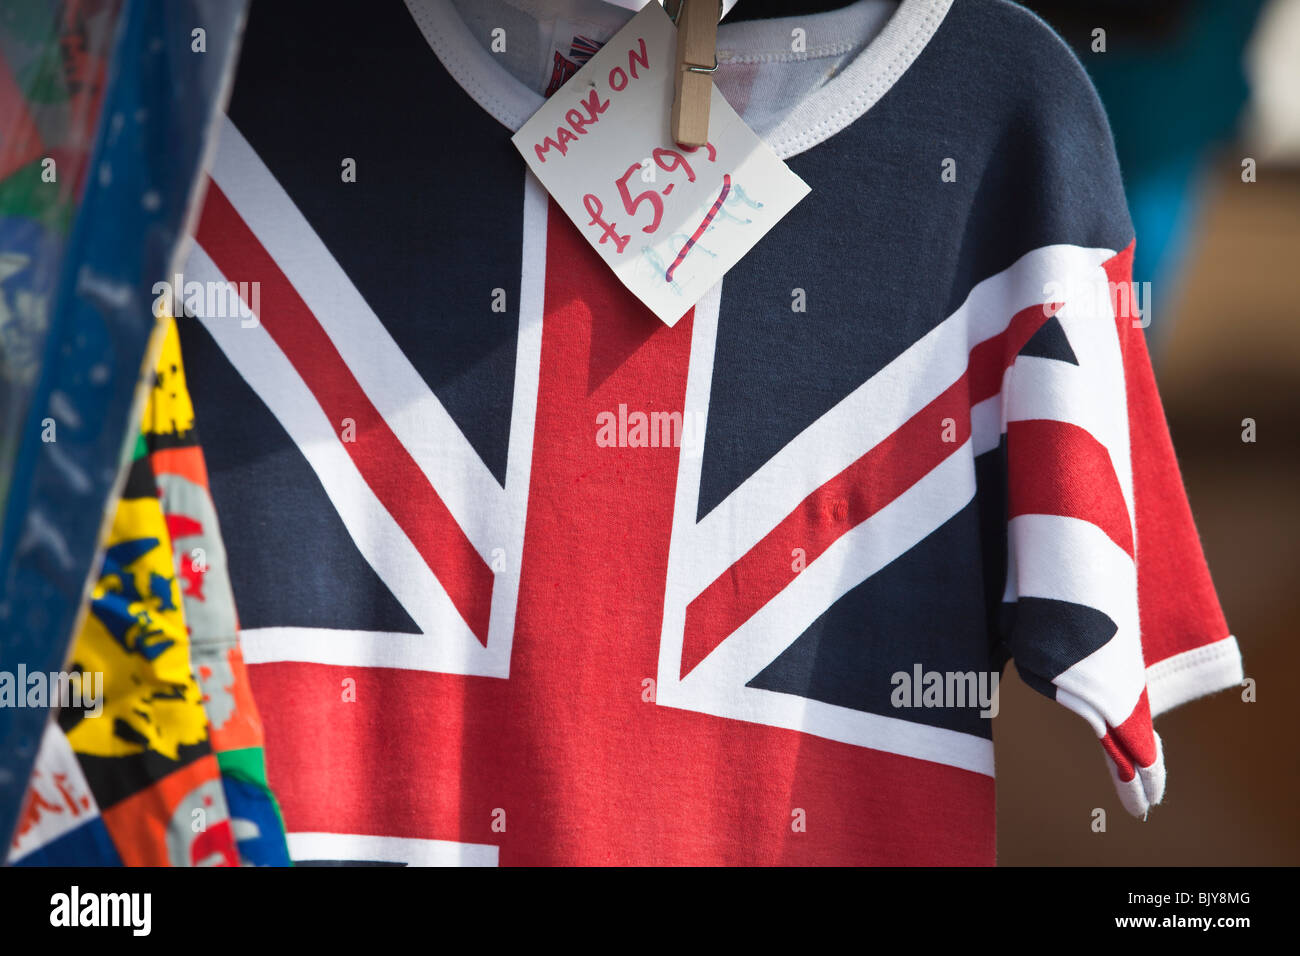 Union Jack T shirt on sale in a market Stock Photo